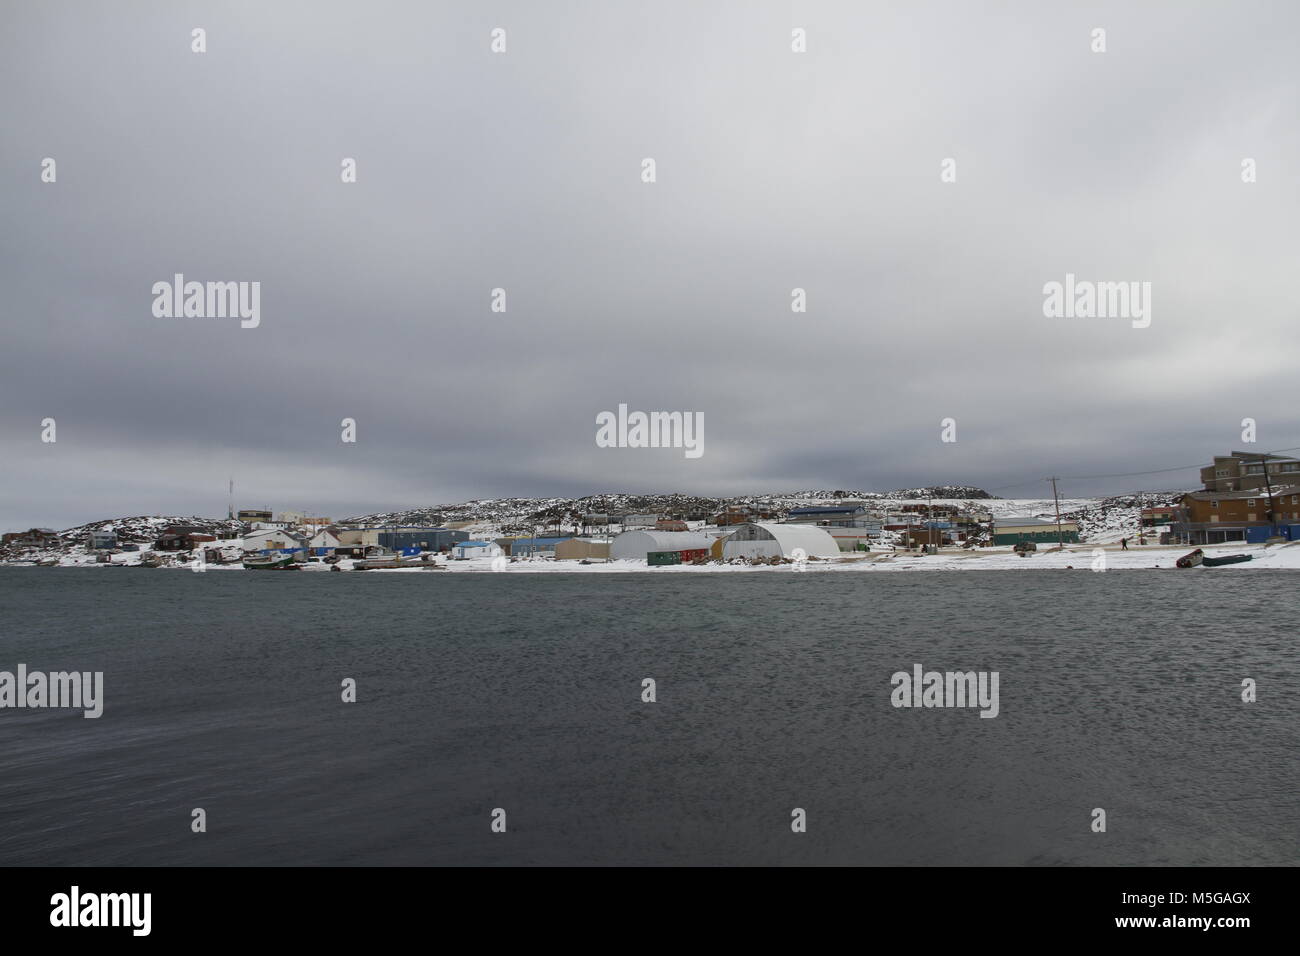 View of Cape Dorset (Kinngait) Nunavut, a northern Inuit community in arctic Canada with the ocean in the foreground Stock Photo